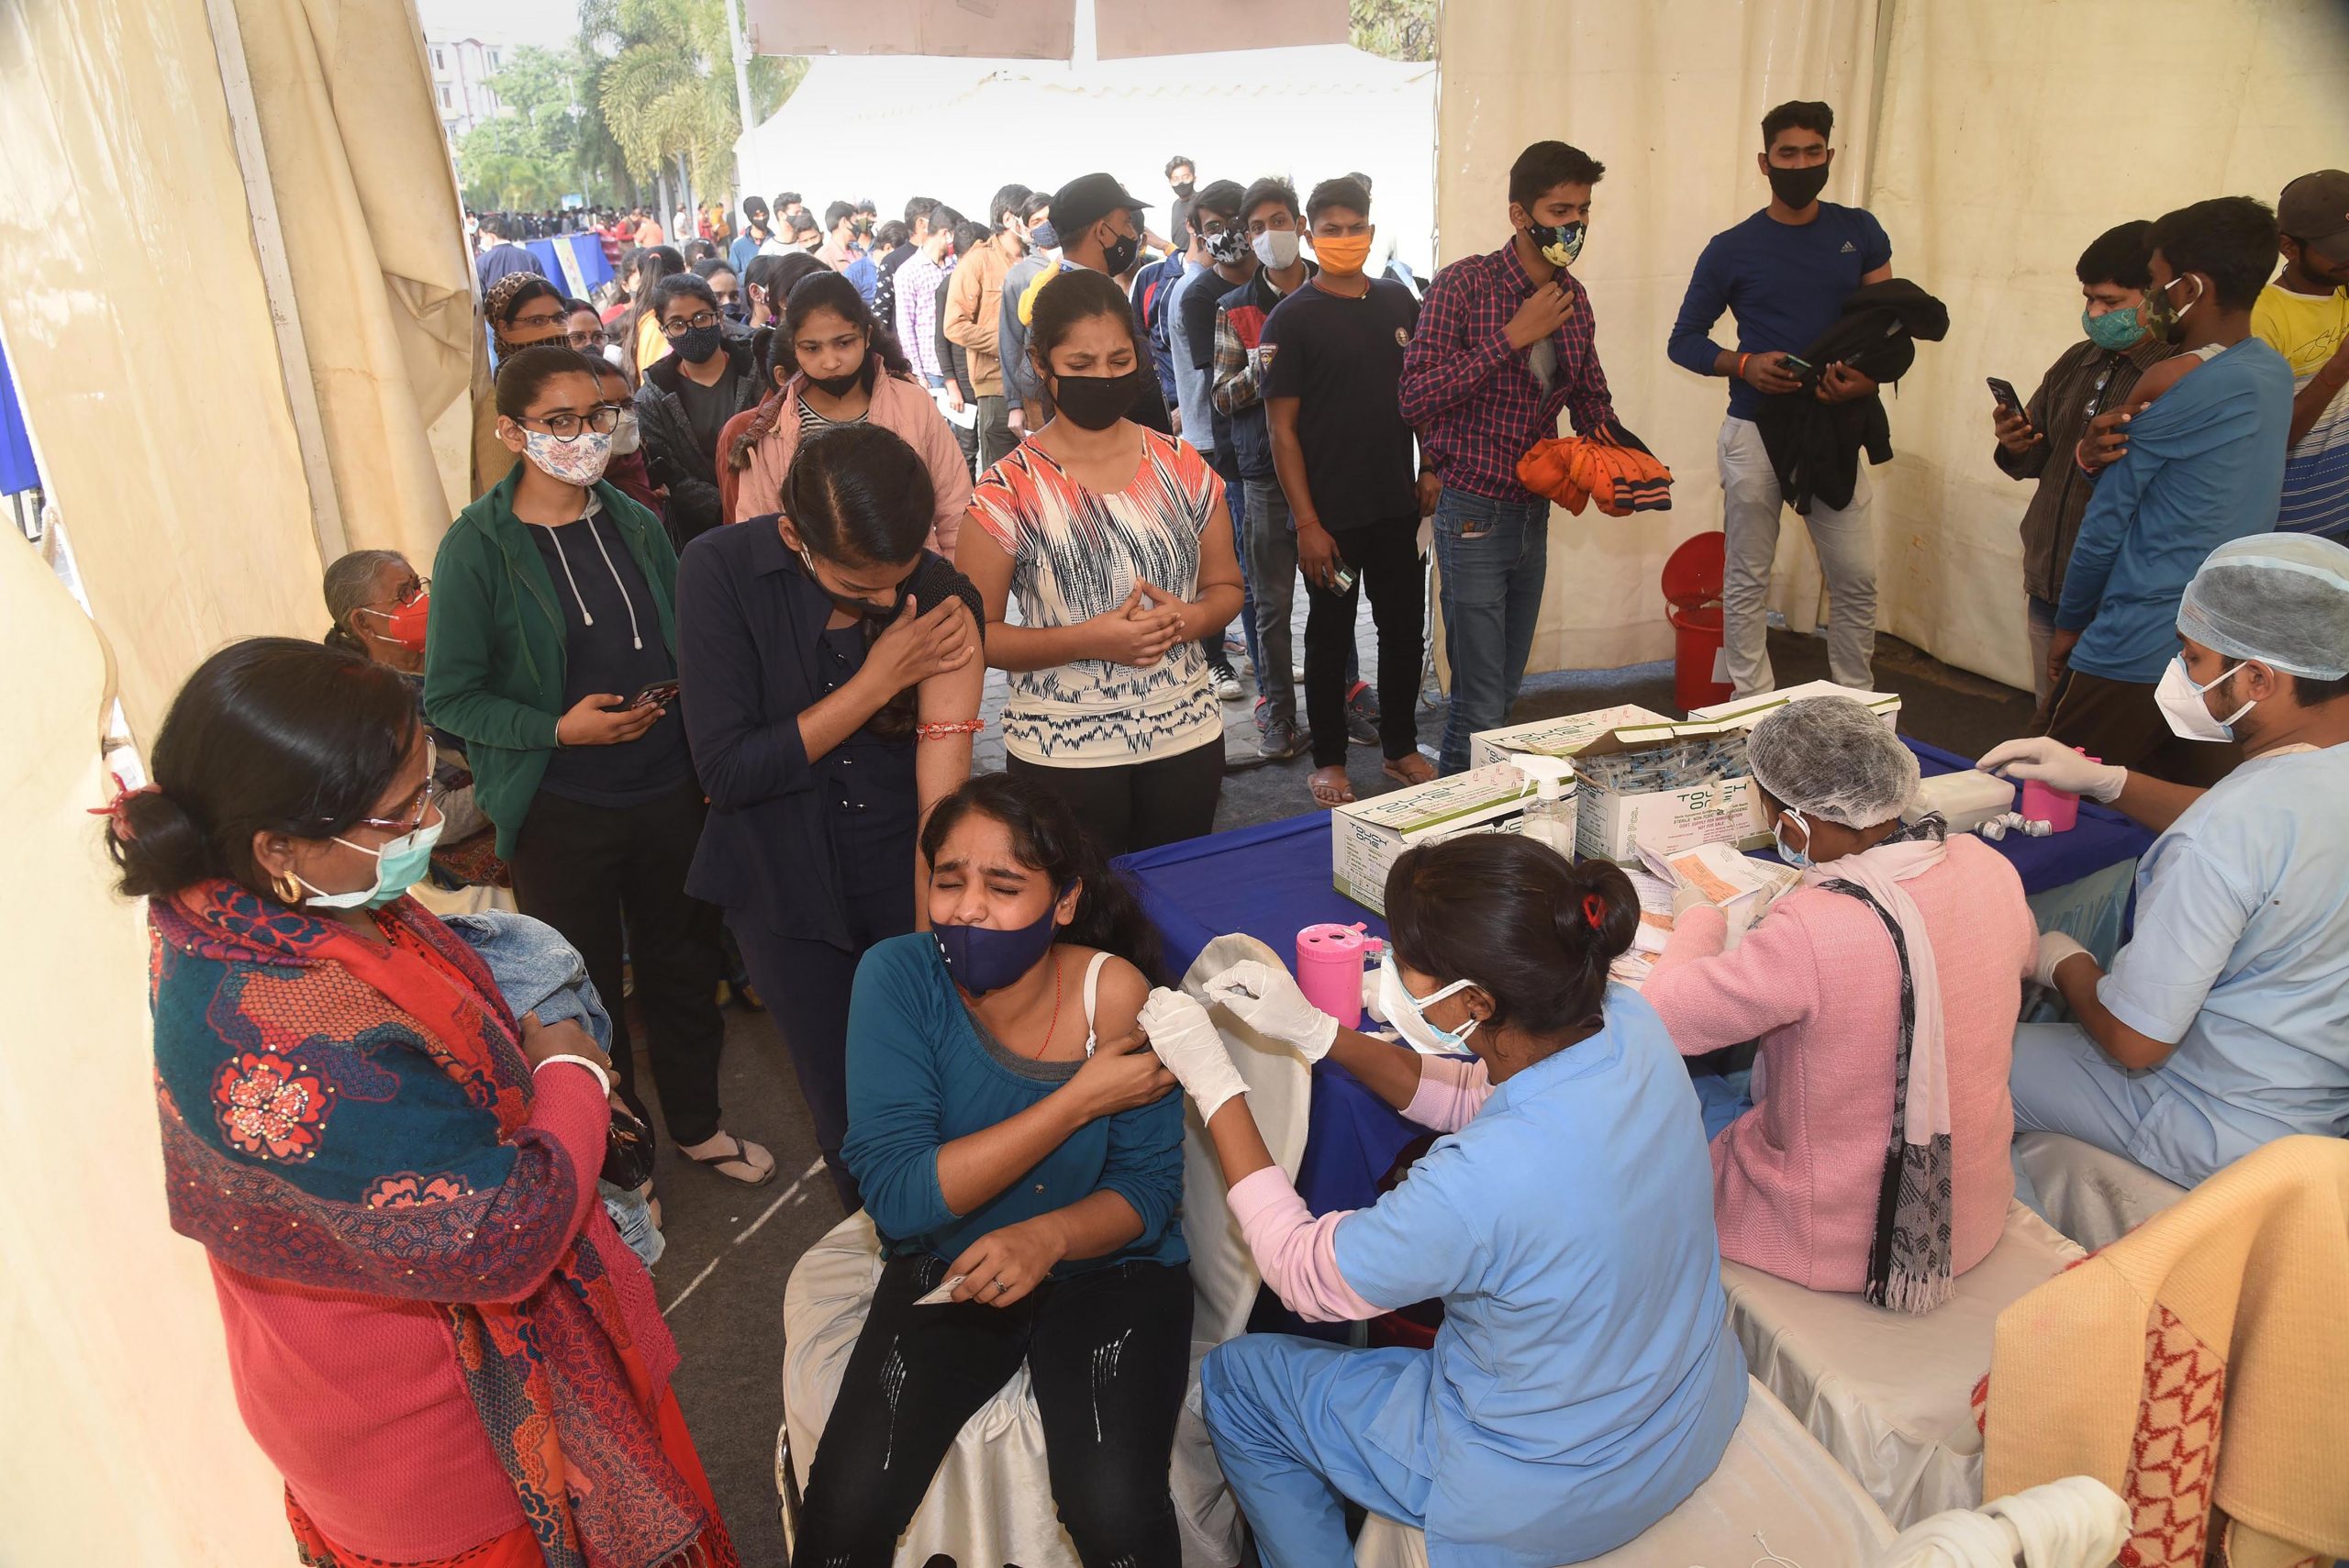 India reports 1,41,986 new COVID-19 cases, 285 deaths in last 24 hours